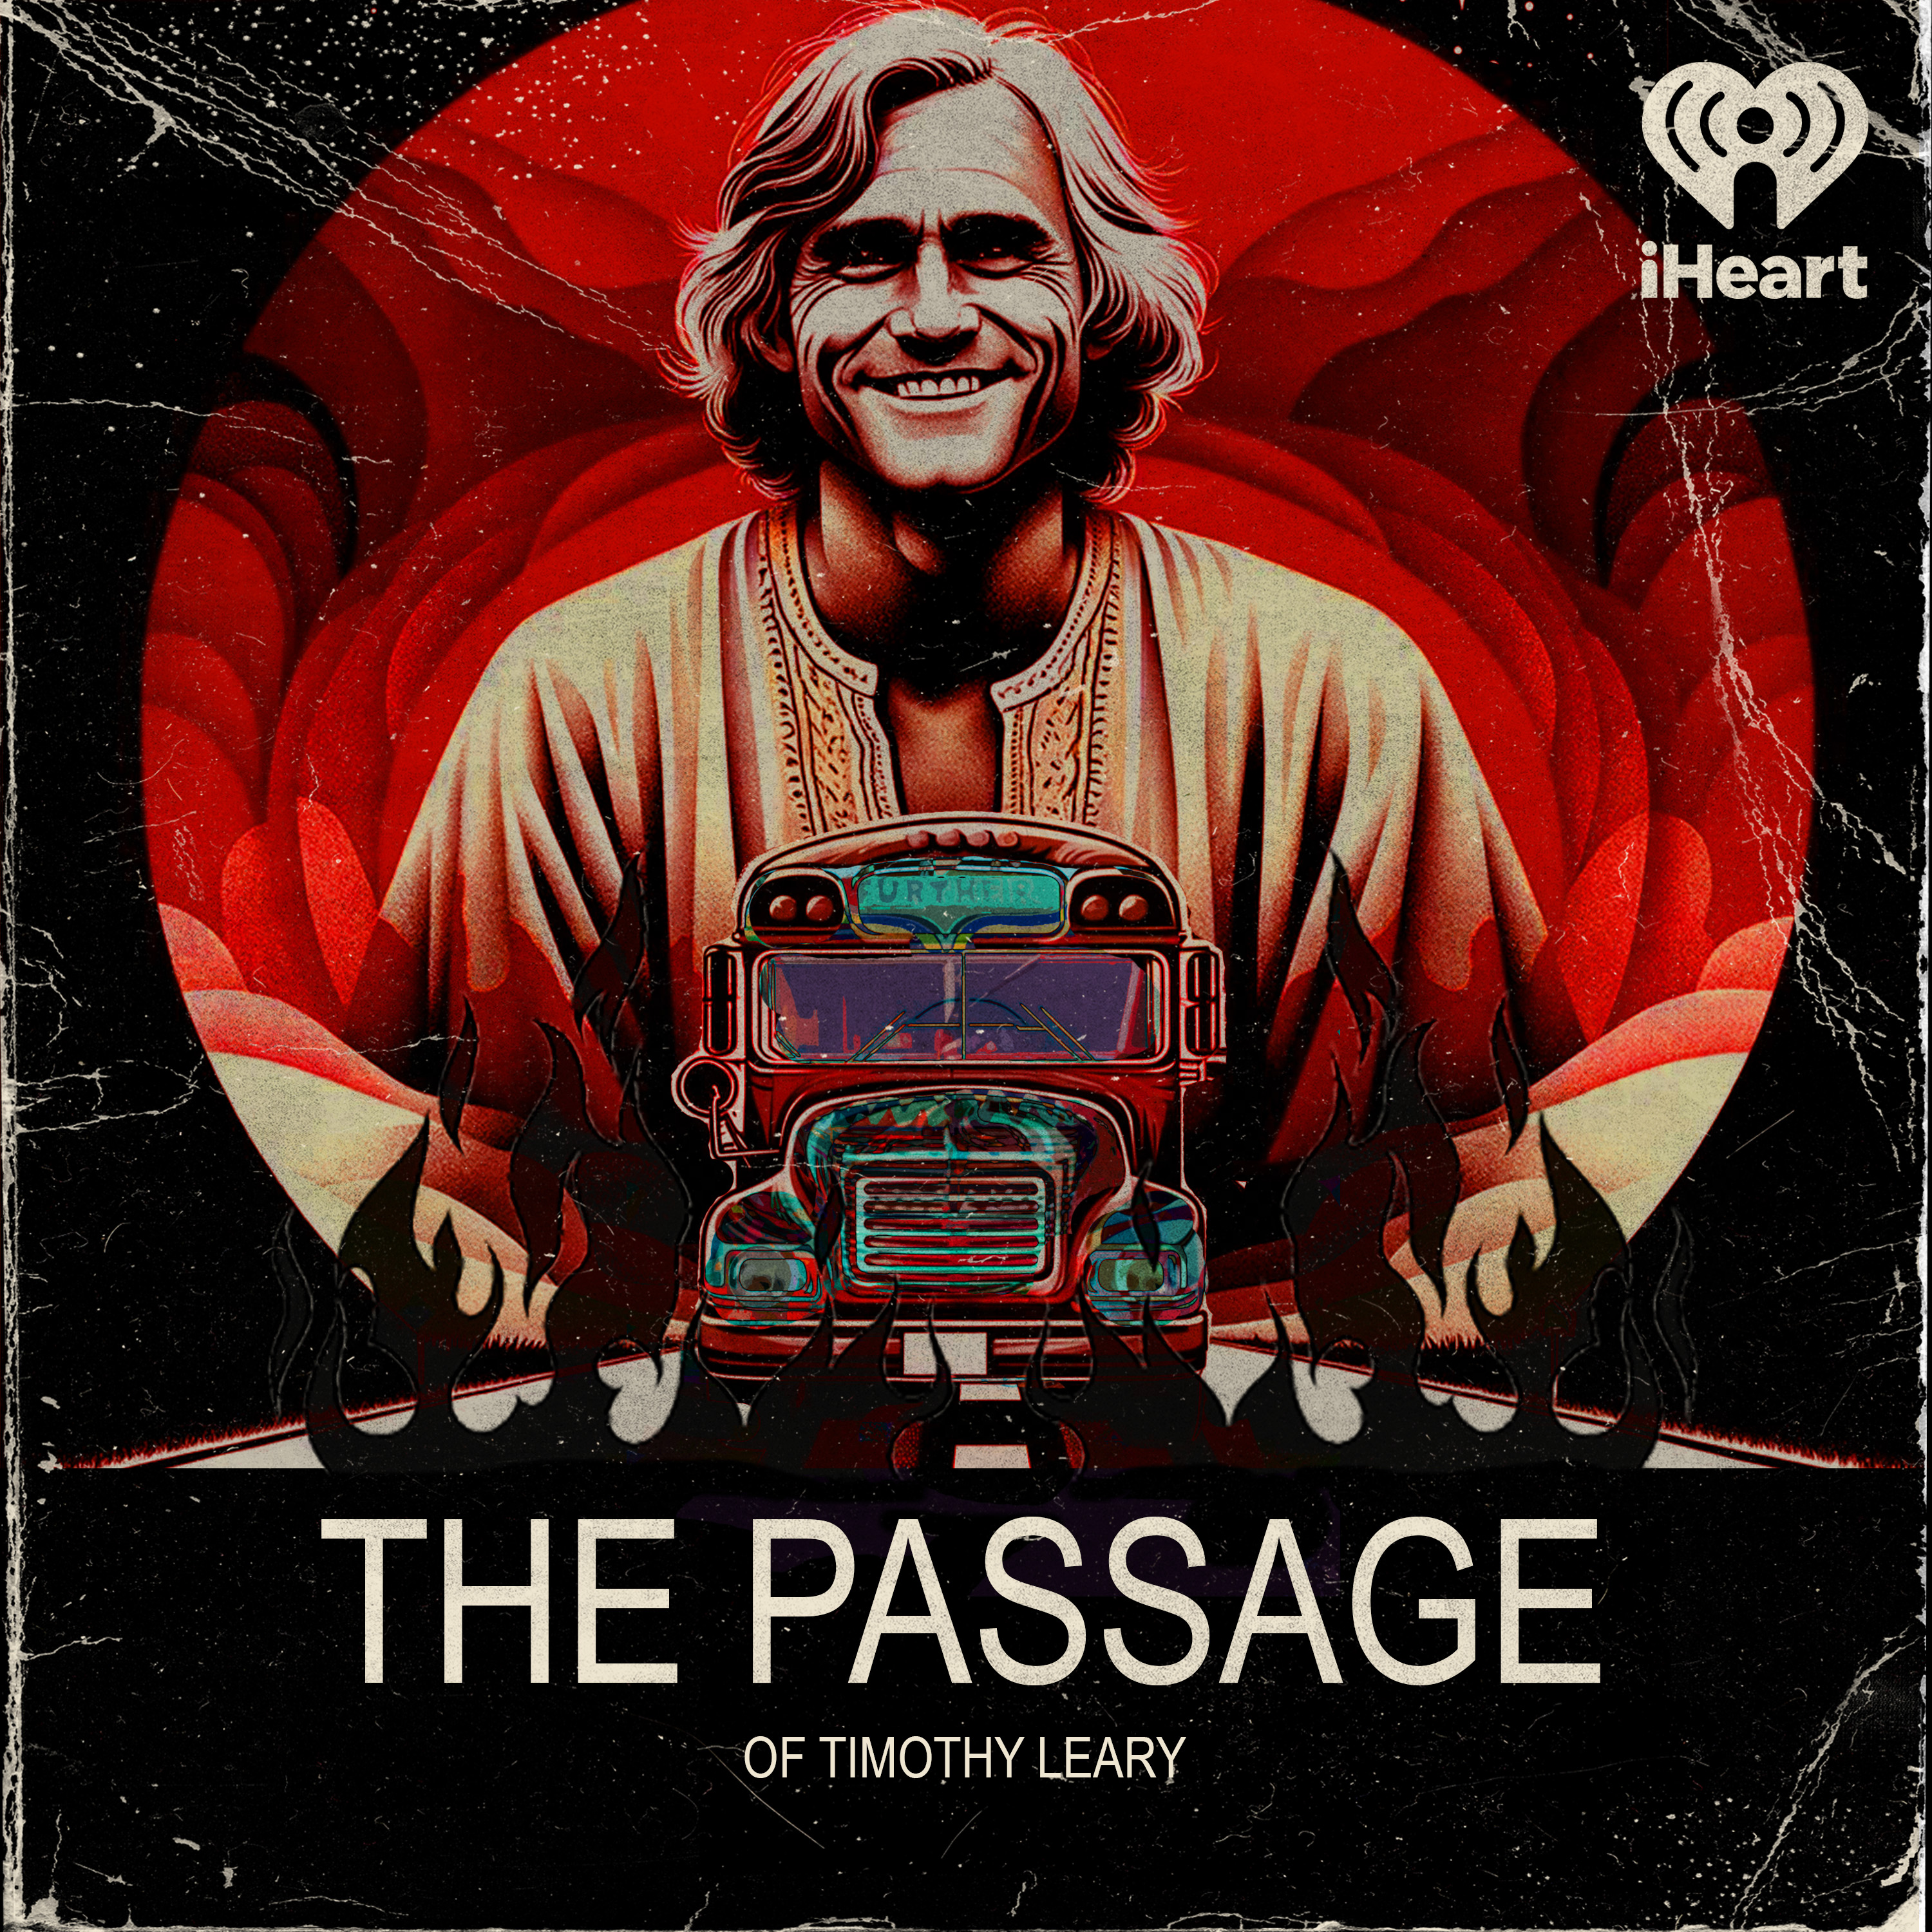 Episode 10: TIMOTHY LEARY’S LAST TRIP